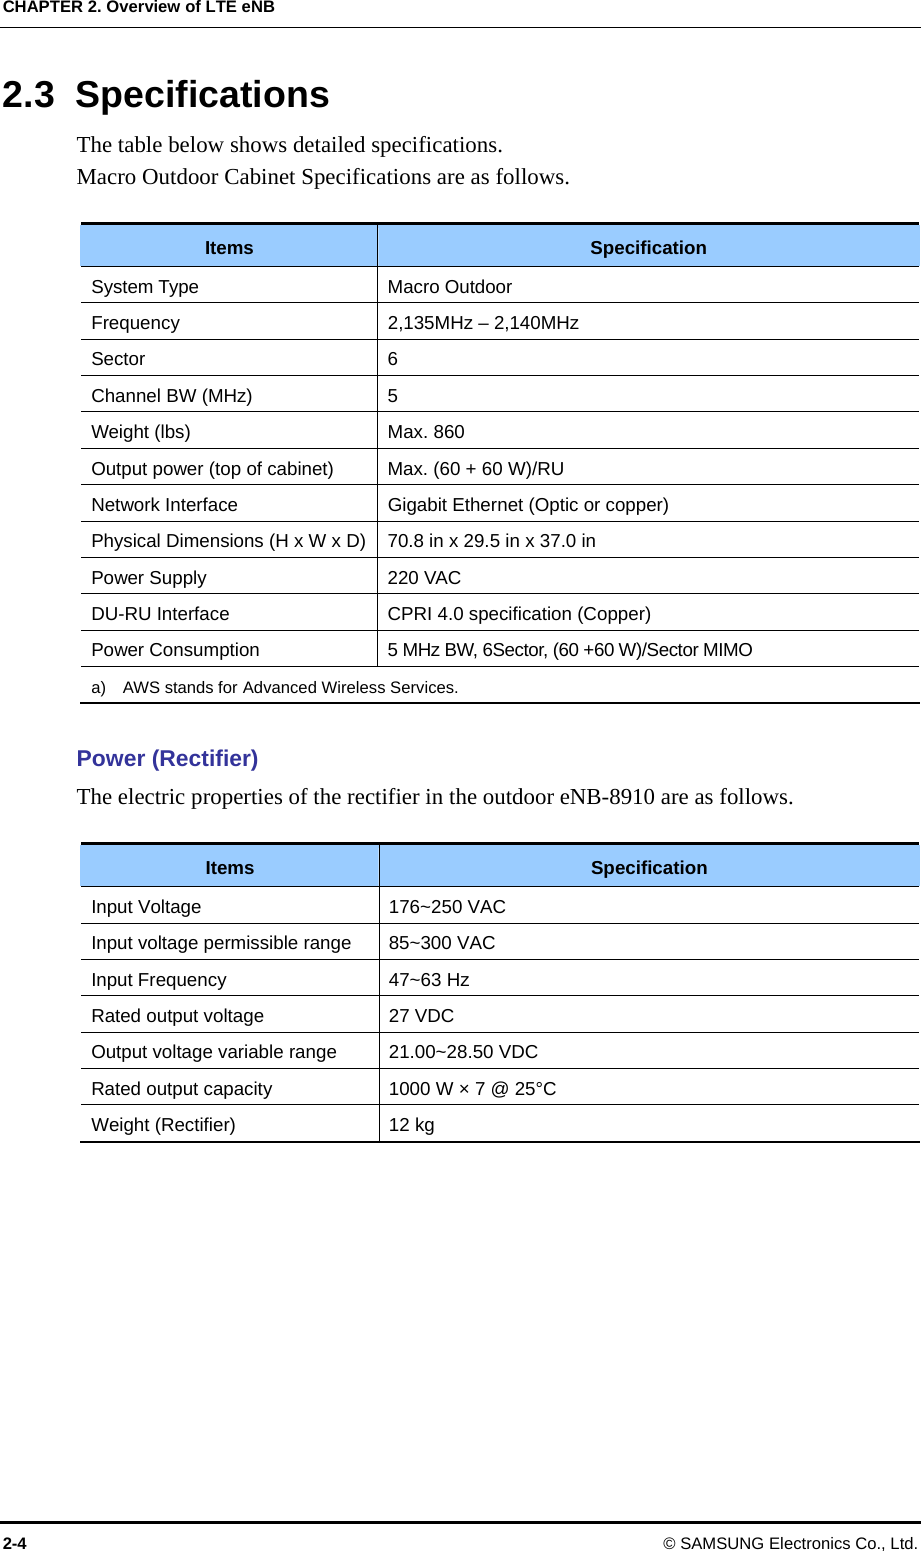 CHAPTER 2. Overview of LTE eNB 2-4  © SAMSUNG Electronics Co., Ltd. 2.3 Specifications The table below shows detailed specifications. Macro Outdoor Cabinet Specifications are as follows.  Items  Specification System Type  Macro Outdoor Frequency  2,135MHz – 2,140MHz Sector 6 Channel BW (MHz)  5 Weight (lbs)  Max. 860 Output power (top of cabinet)  Max. (60 + 60 W)/RU Network Interface  Gigabit Ethernet (Optic or copper) Physical Dimensions (H x W x D)  70.8 in x 29.5 in x 37.0 in Power Supply  220 VAC DU-RU Interface  CPRI 4.0 specification (Copper) Power Consumption  5 MHz BW, 6Sector, (60 +60 W)/Sector MIMO a)  AWS stands for Advanced Wireless Services.    Power (Rectifier) The electric properties of the rectifier in the outdoor eNB-8910 are as follows.  Items  Specification Input Voltage    176~250 VAC Input voltage permissible range  85~300 VAC Input Frequency  47~63 Hz Rated output voltage  27 VDC Output voltage variable range  21.00~28.50 VDC Rated output capacity  1000 W × 7 @ 25°C Weight (Rectifier)  12 kg     